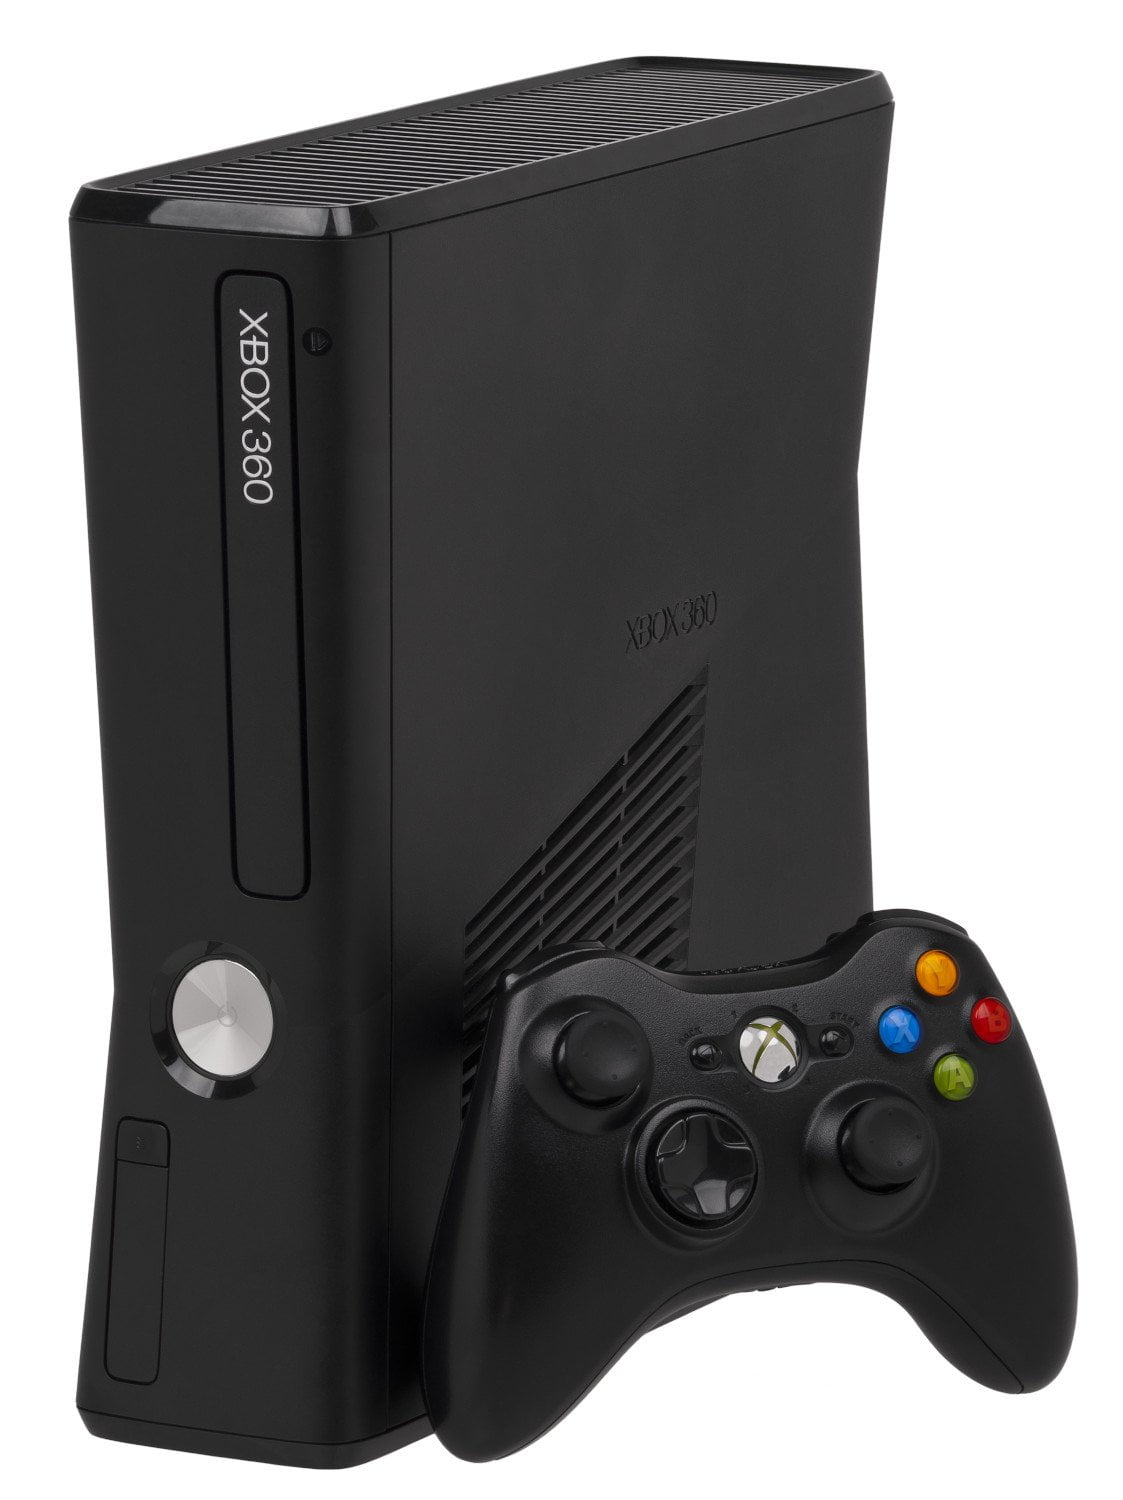 Exploring The Xbox 360 In 2021 - What's Left? 